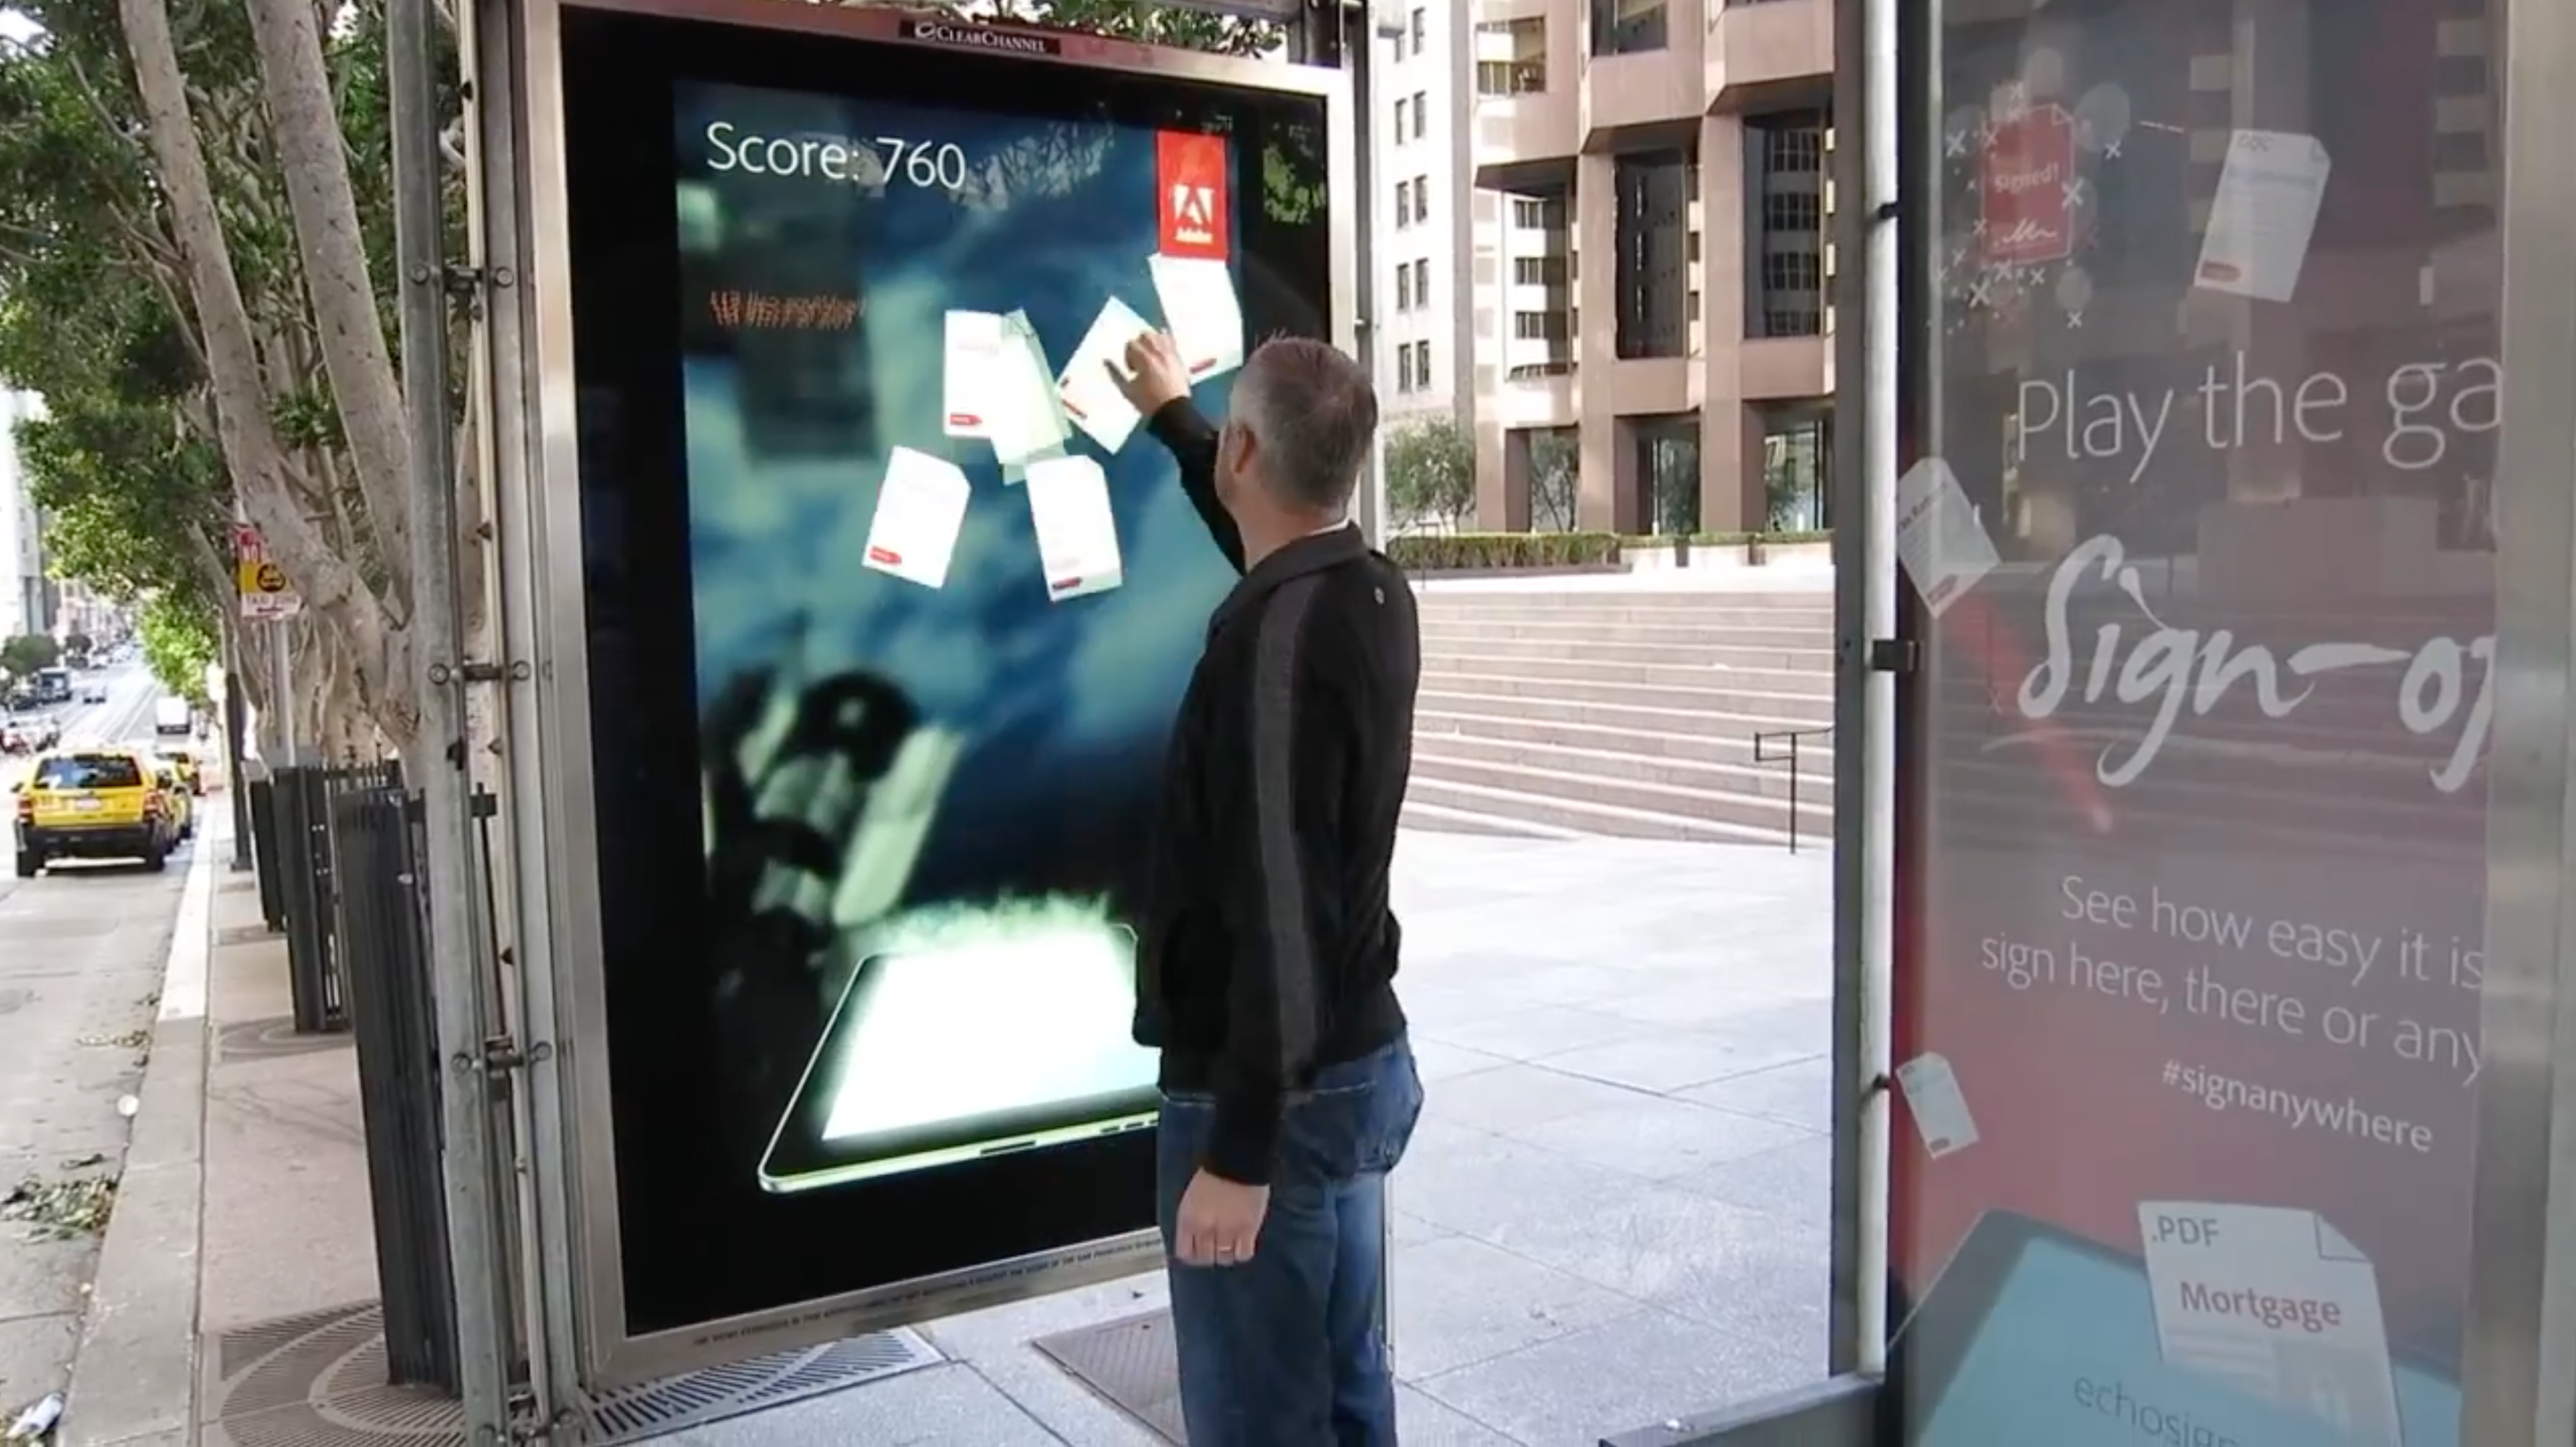 An on street interactive digital ad where a bystander is playing a game on it. There score is 760